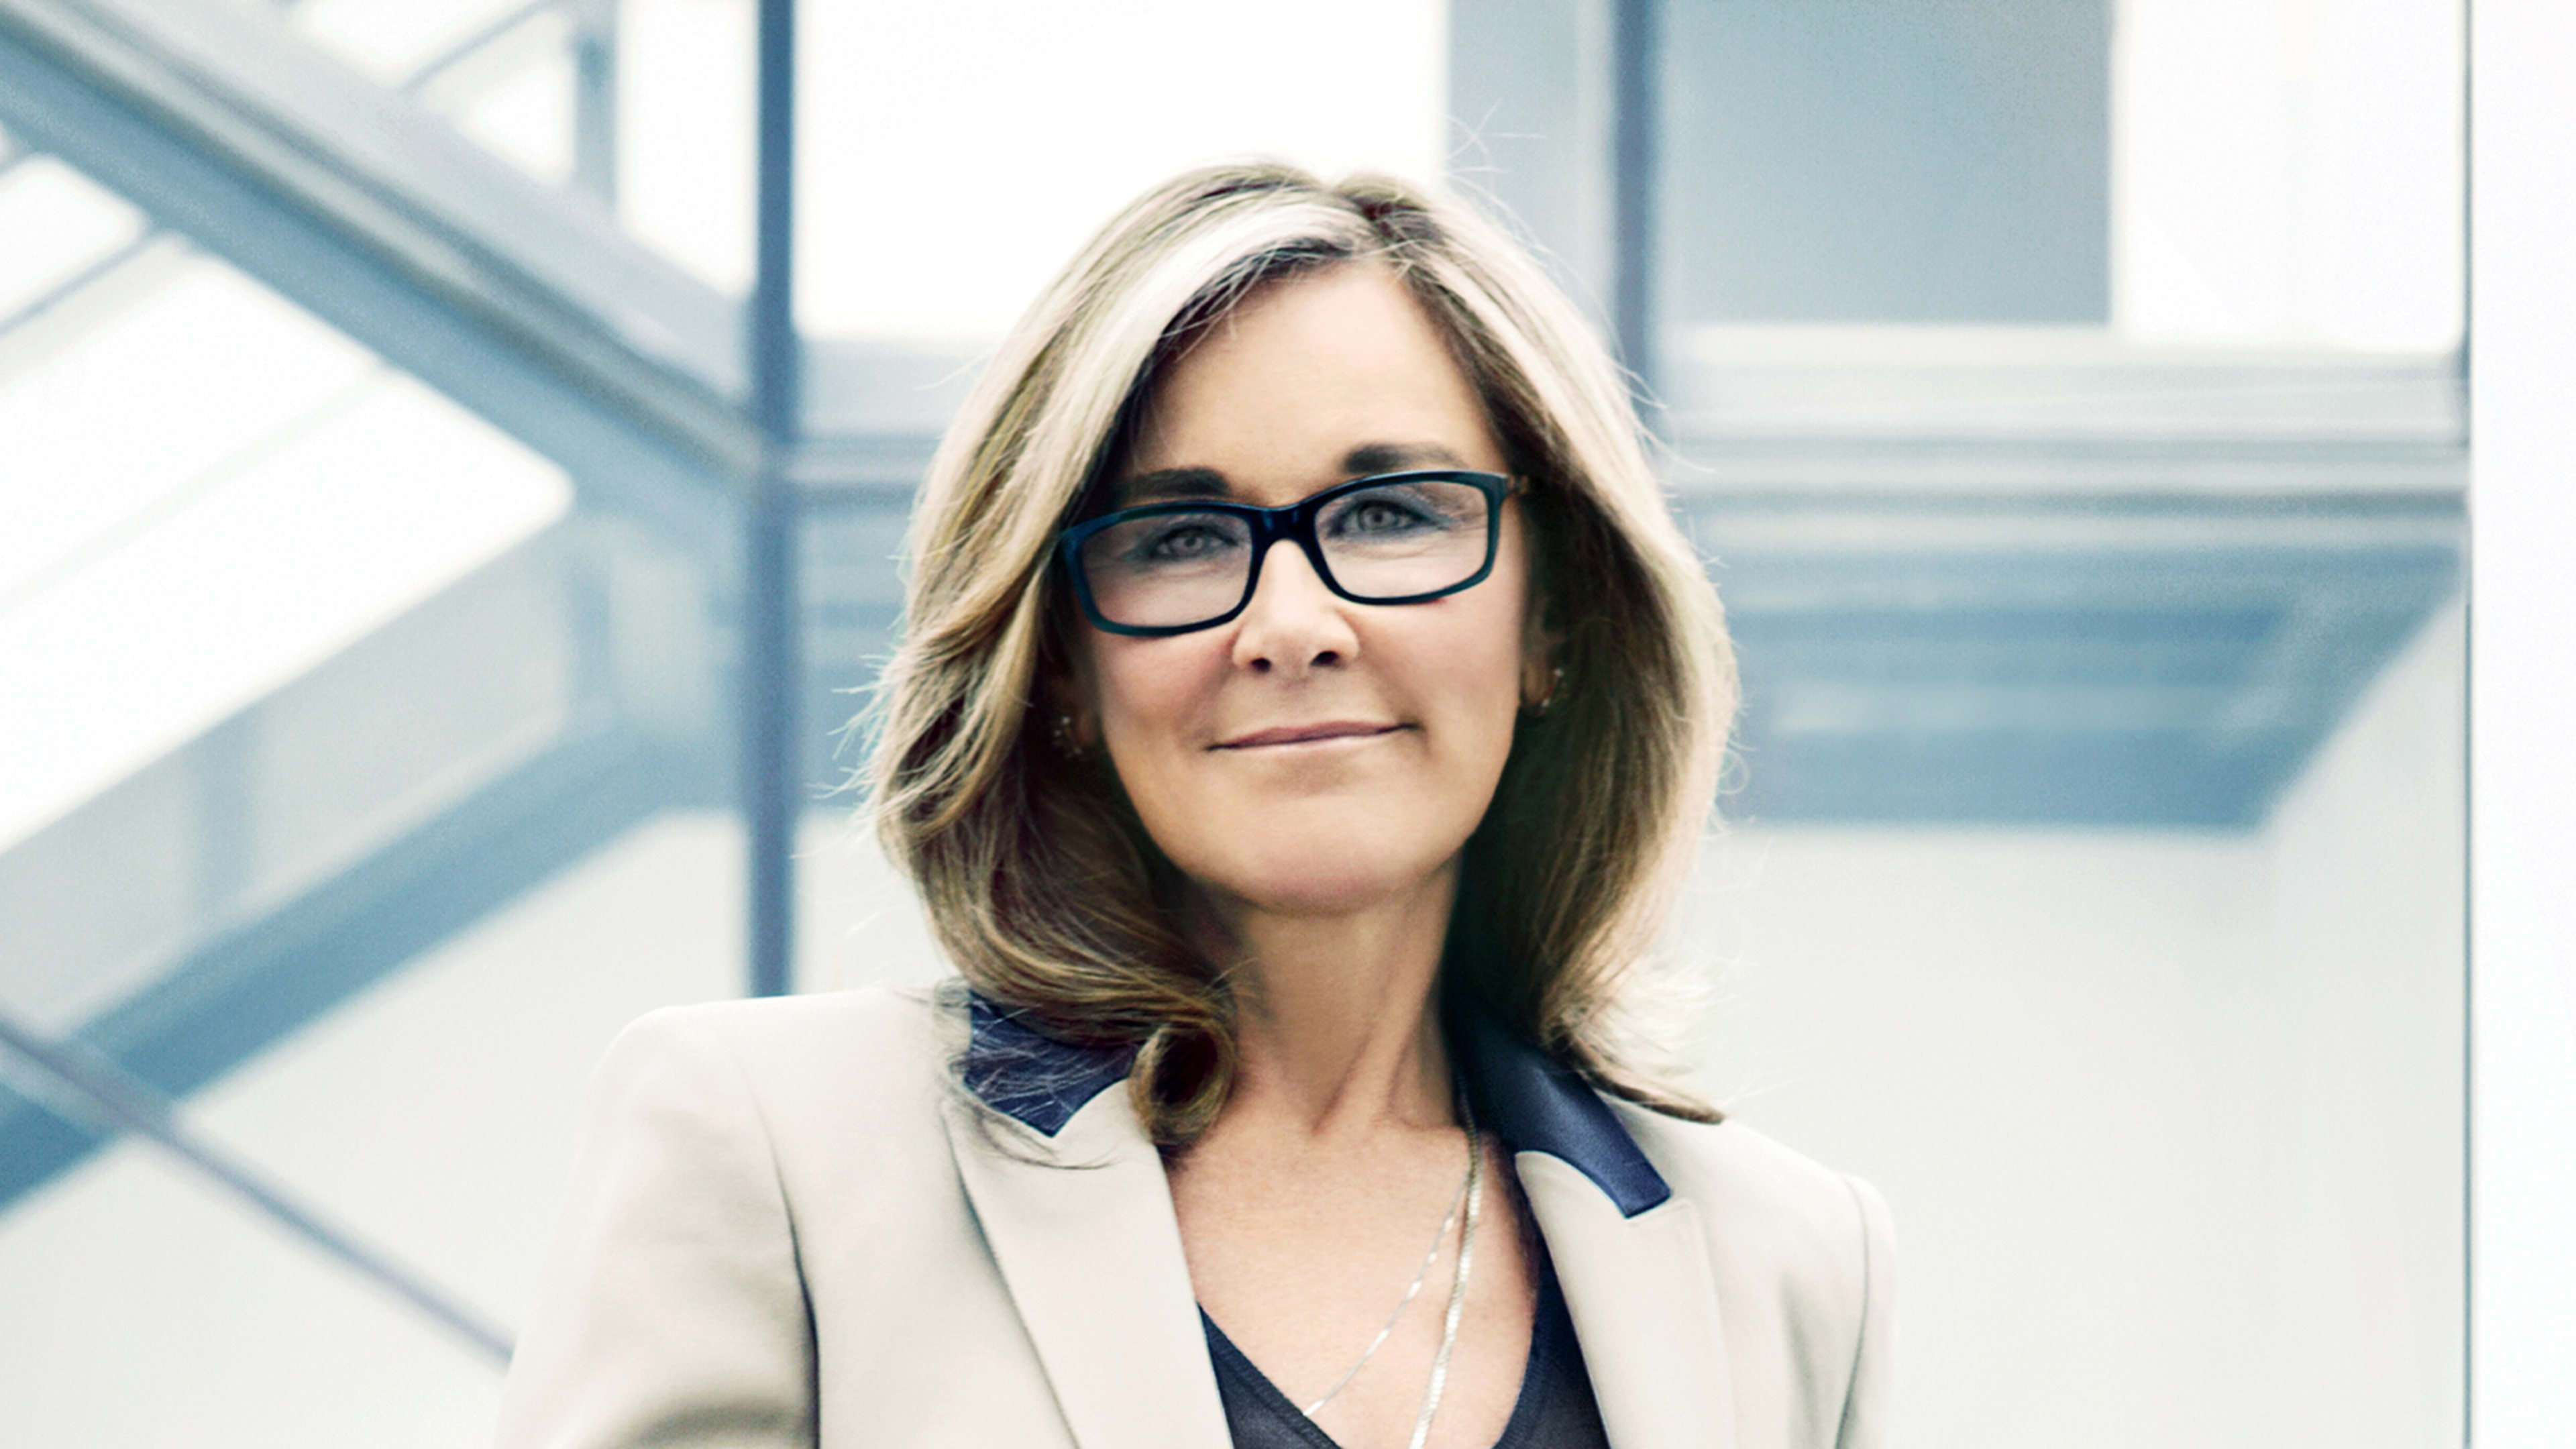 Can Apple’s Angela Ahrendts Spark A Retail Revolution?